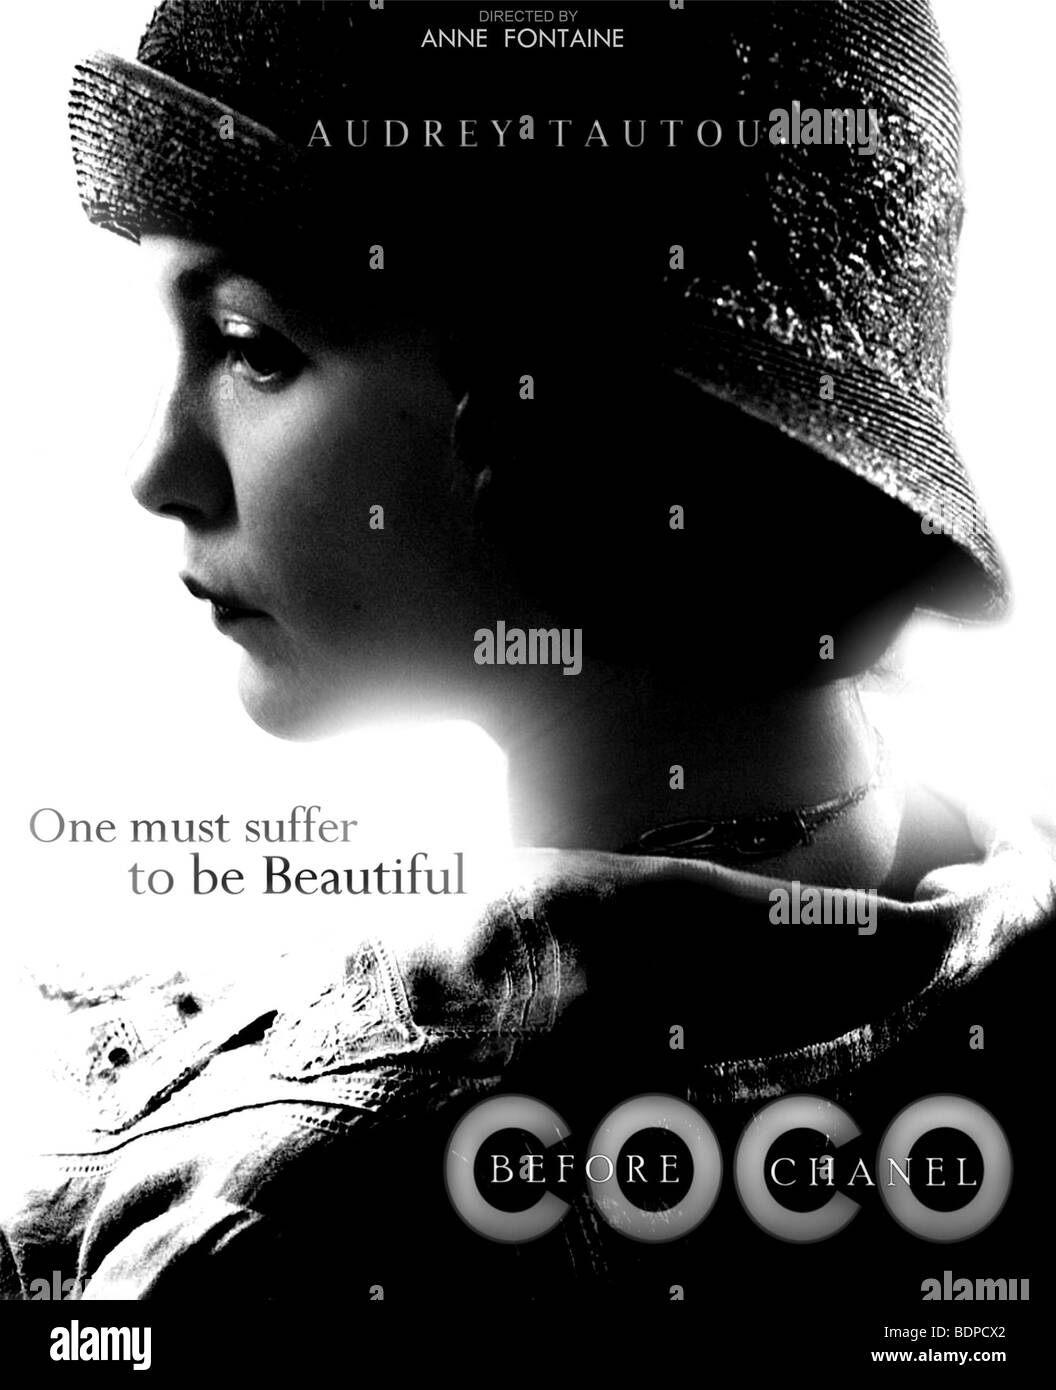 Coco avant Chanel Coco before Chanel Year : 2009 Director : Anne Fontaine  Audrey Tautou Movie poster (USA Stock Photo - Alamy